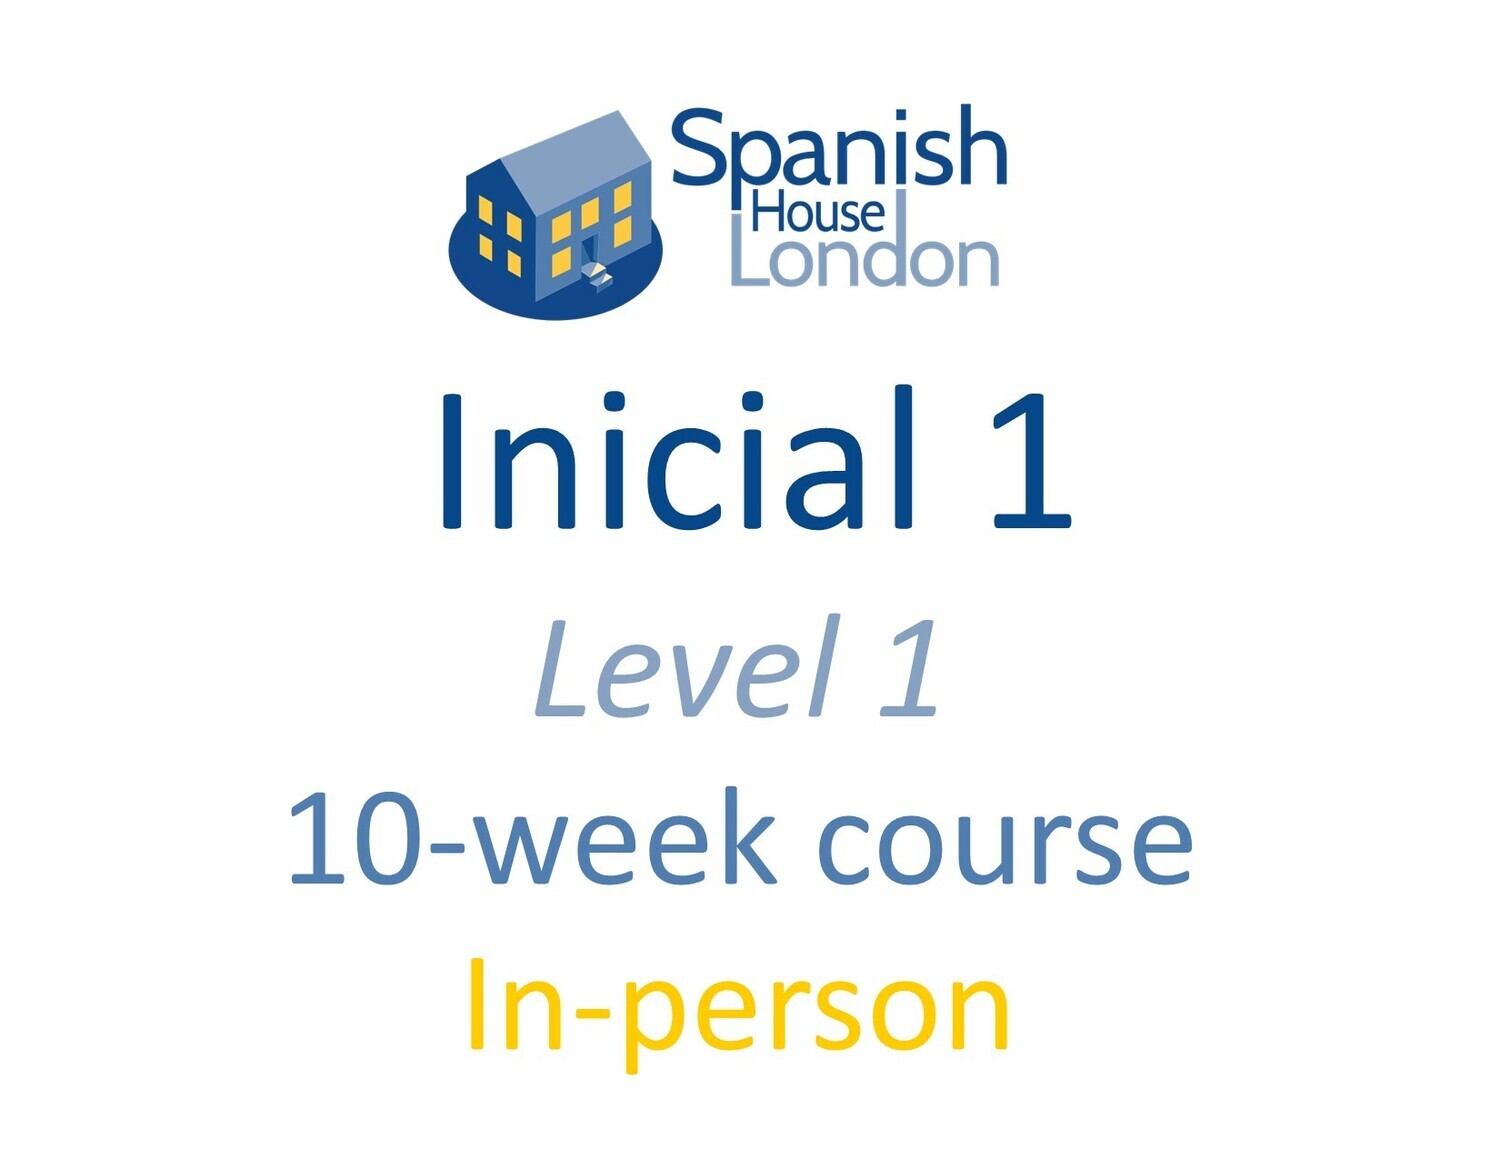 Inicial 1 Course starting on 5th September at 7.30pm in Euston / King's Cross